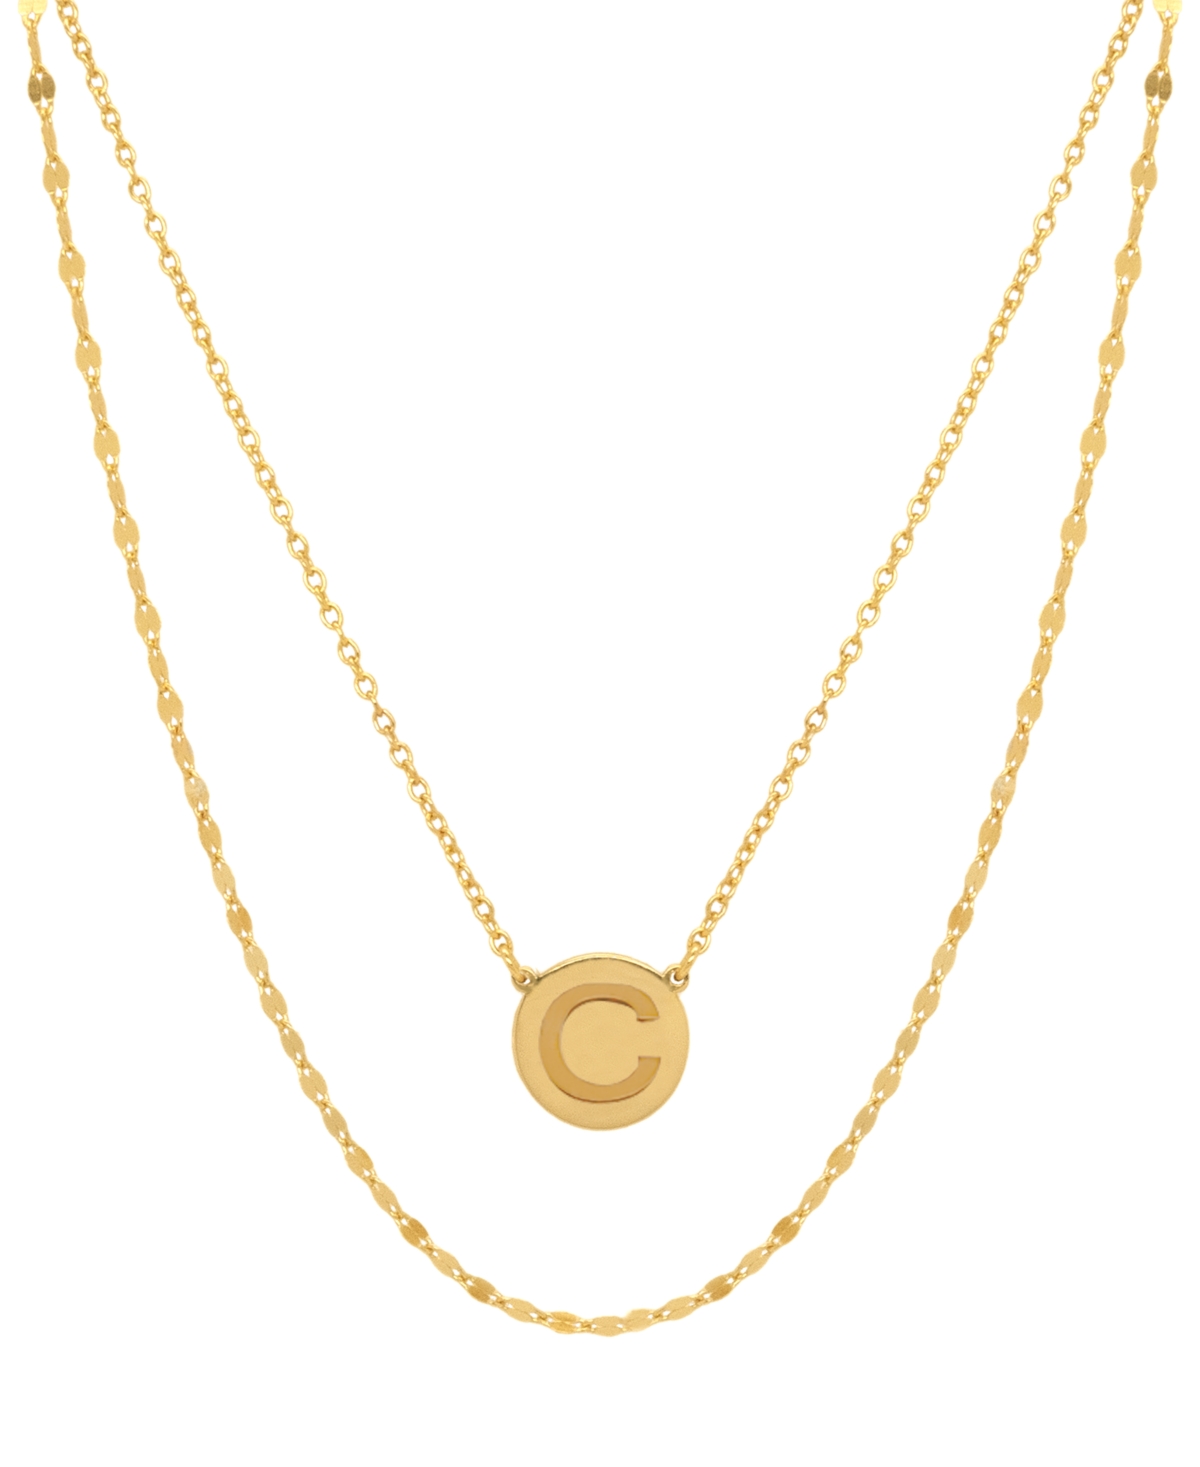 Initial Disc Layered Pendant Necklace in 18k Gold-Plated Sterling Silver, Created for Macy's - P